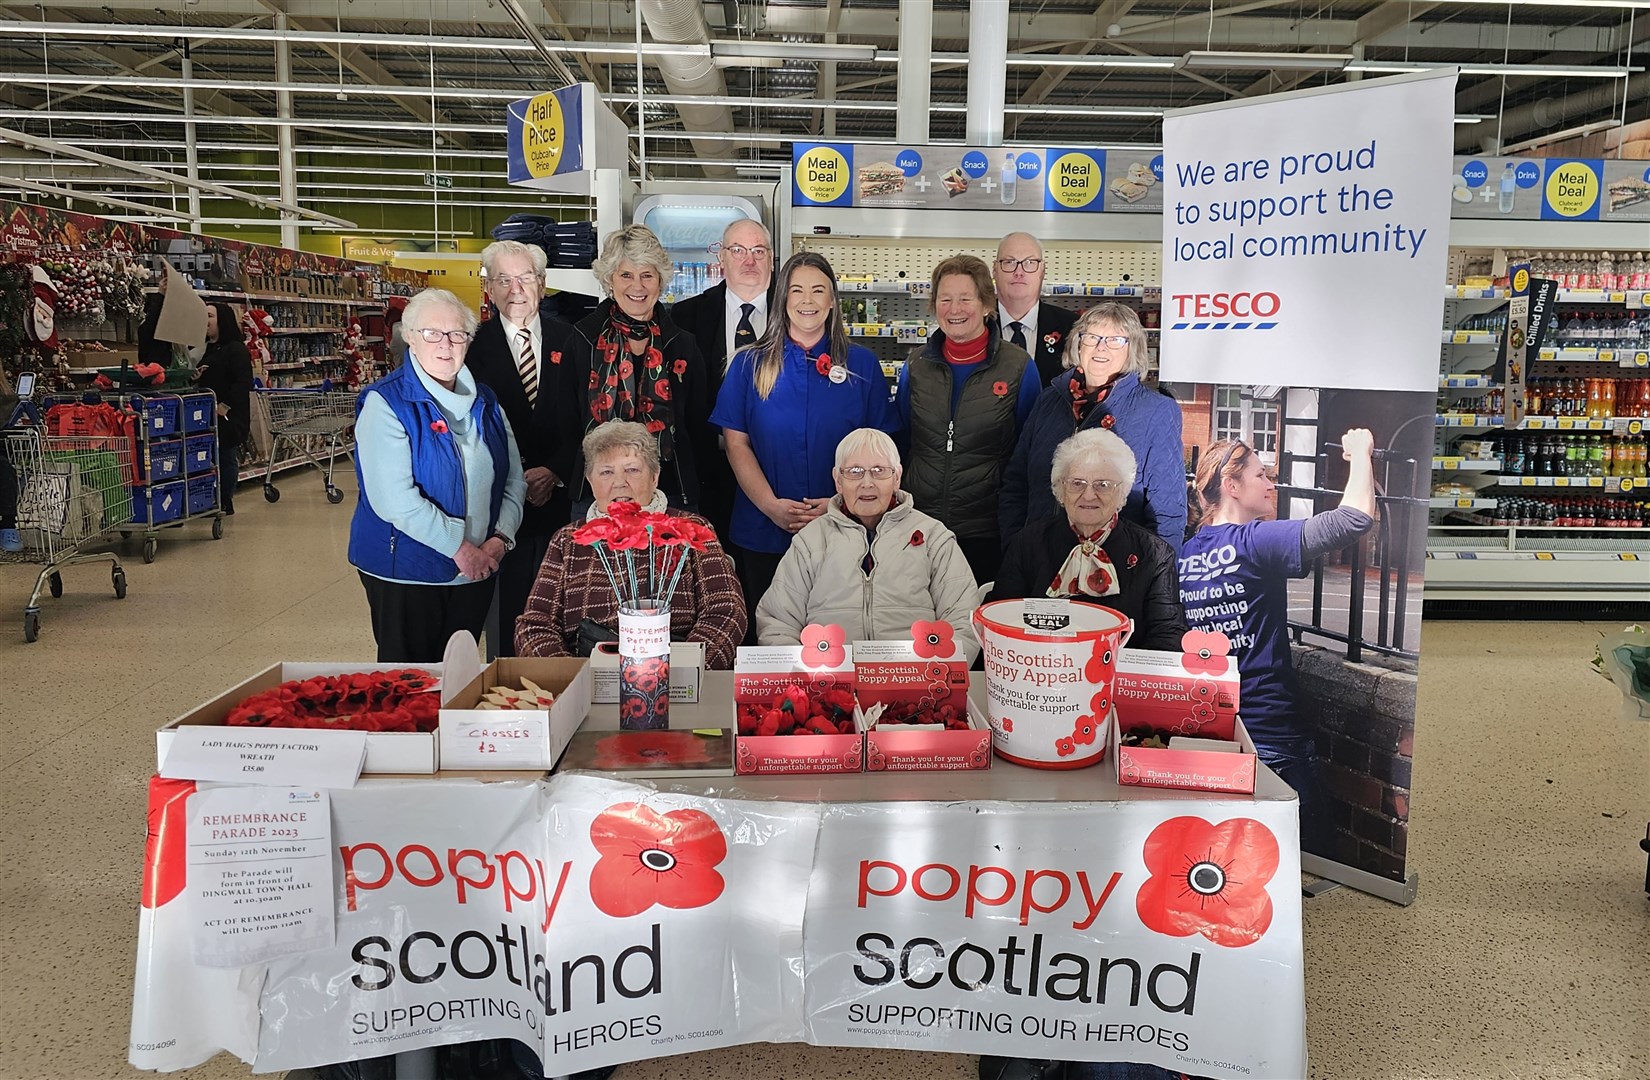 Volunteers from Dingwall came in and worked in shifts to maximise income for Poppyscotland. Community champion Michelle Mackay is standing between the current Lord Lieutenant of Ross and Cromarty, Joanie Whiteford and her predecessor, Janet Bowen.